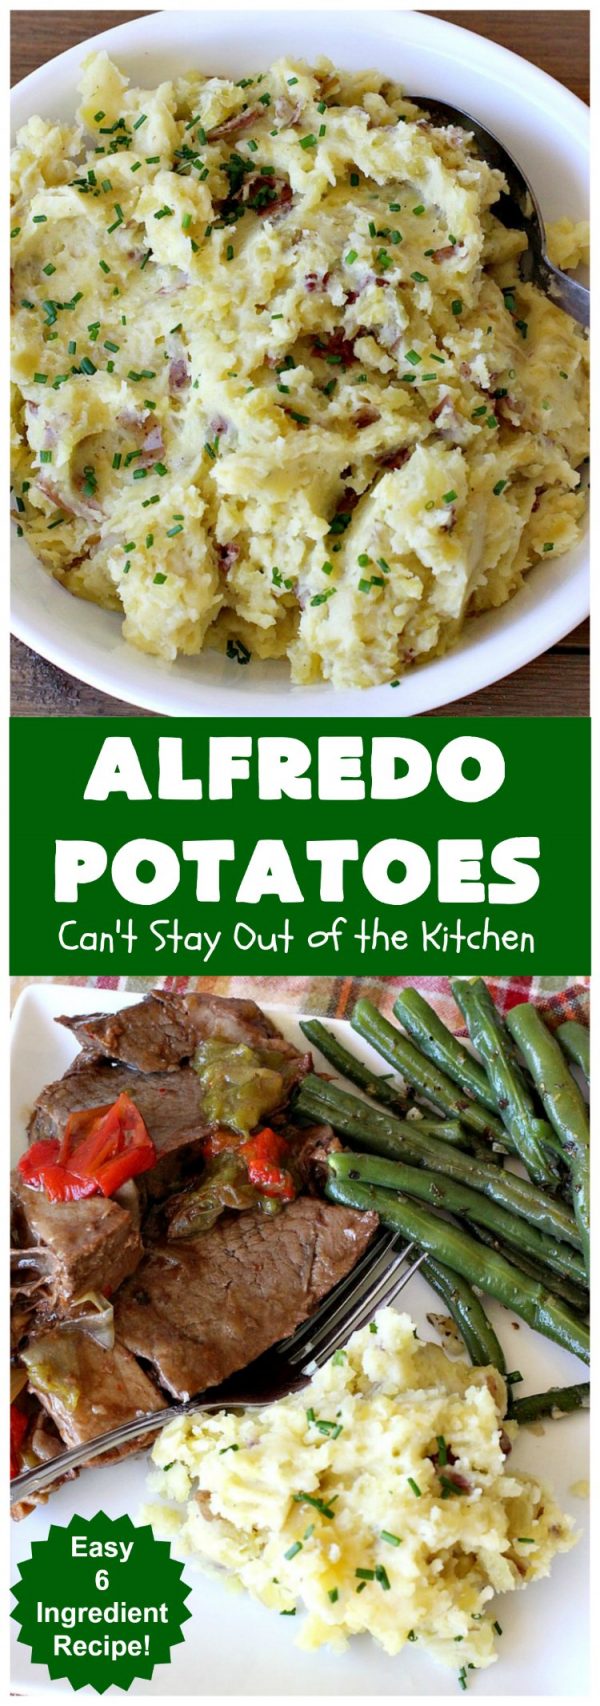 Alfredo Potatoes – Can't Stay Out of the Kitchen